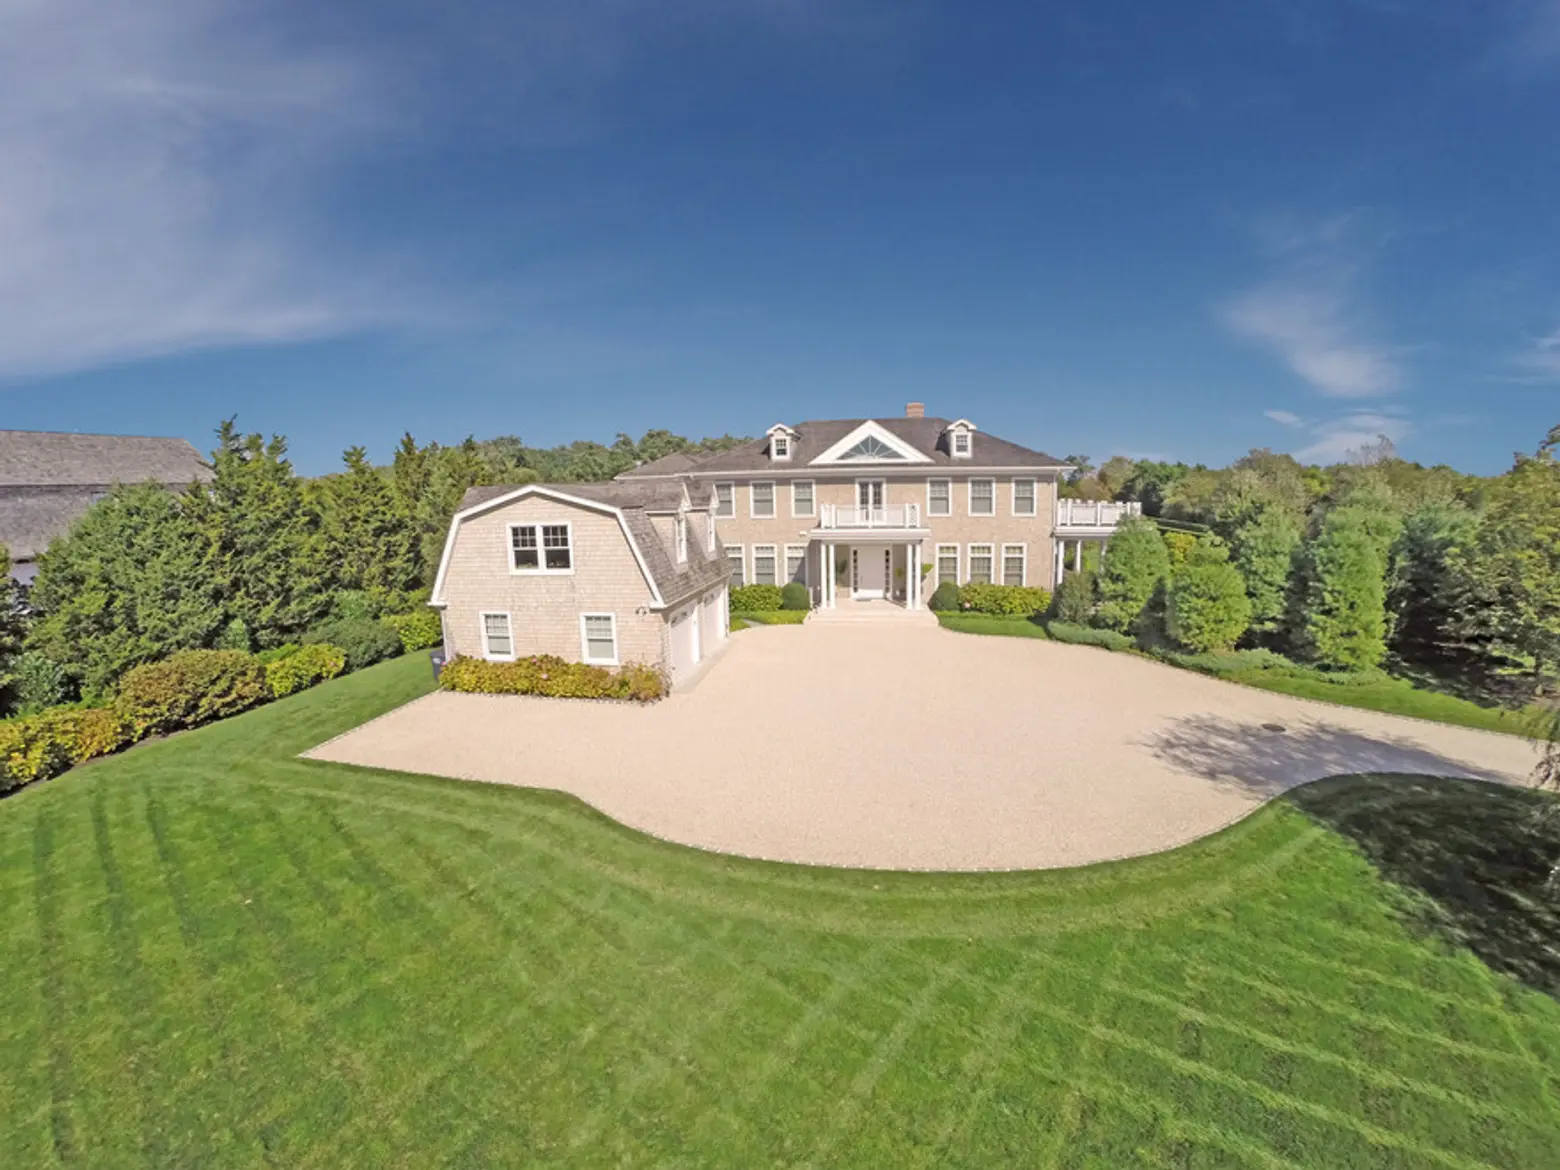 Jason Kidd Puts His Hamptons Mansion on the Market for $7.995M